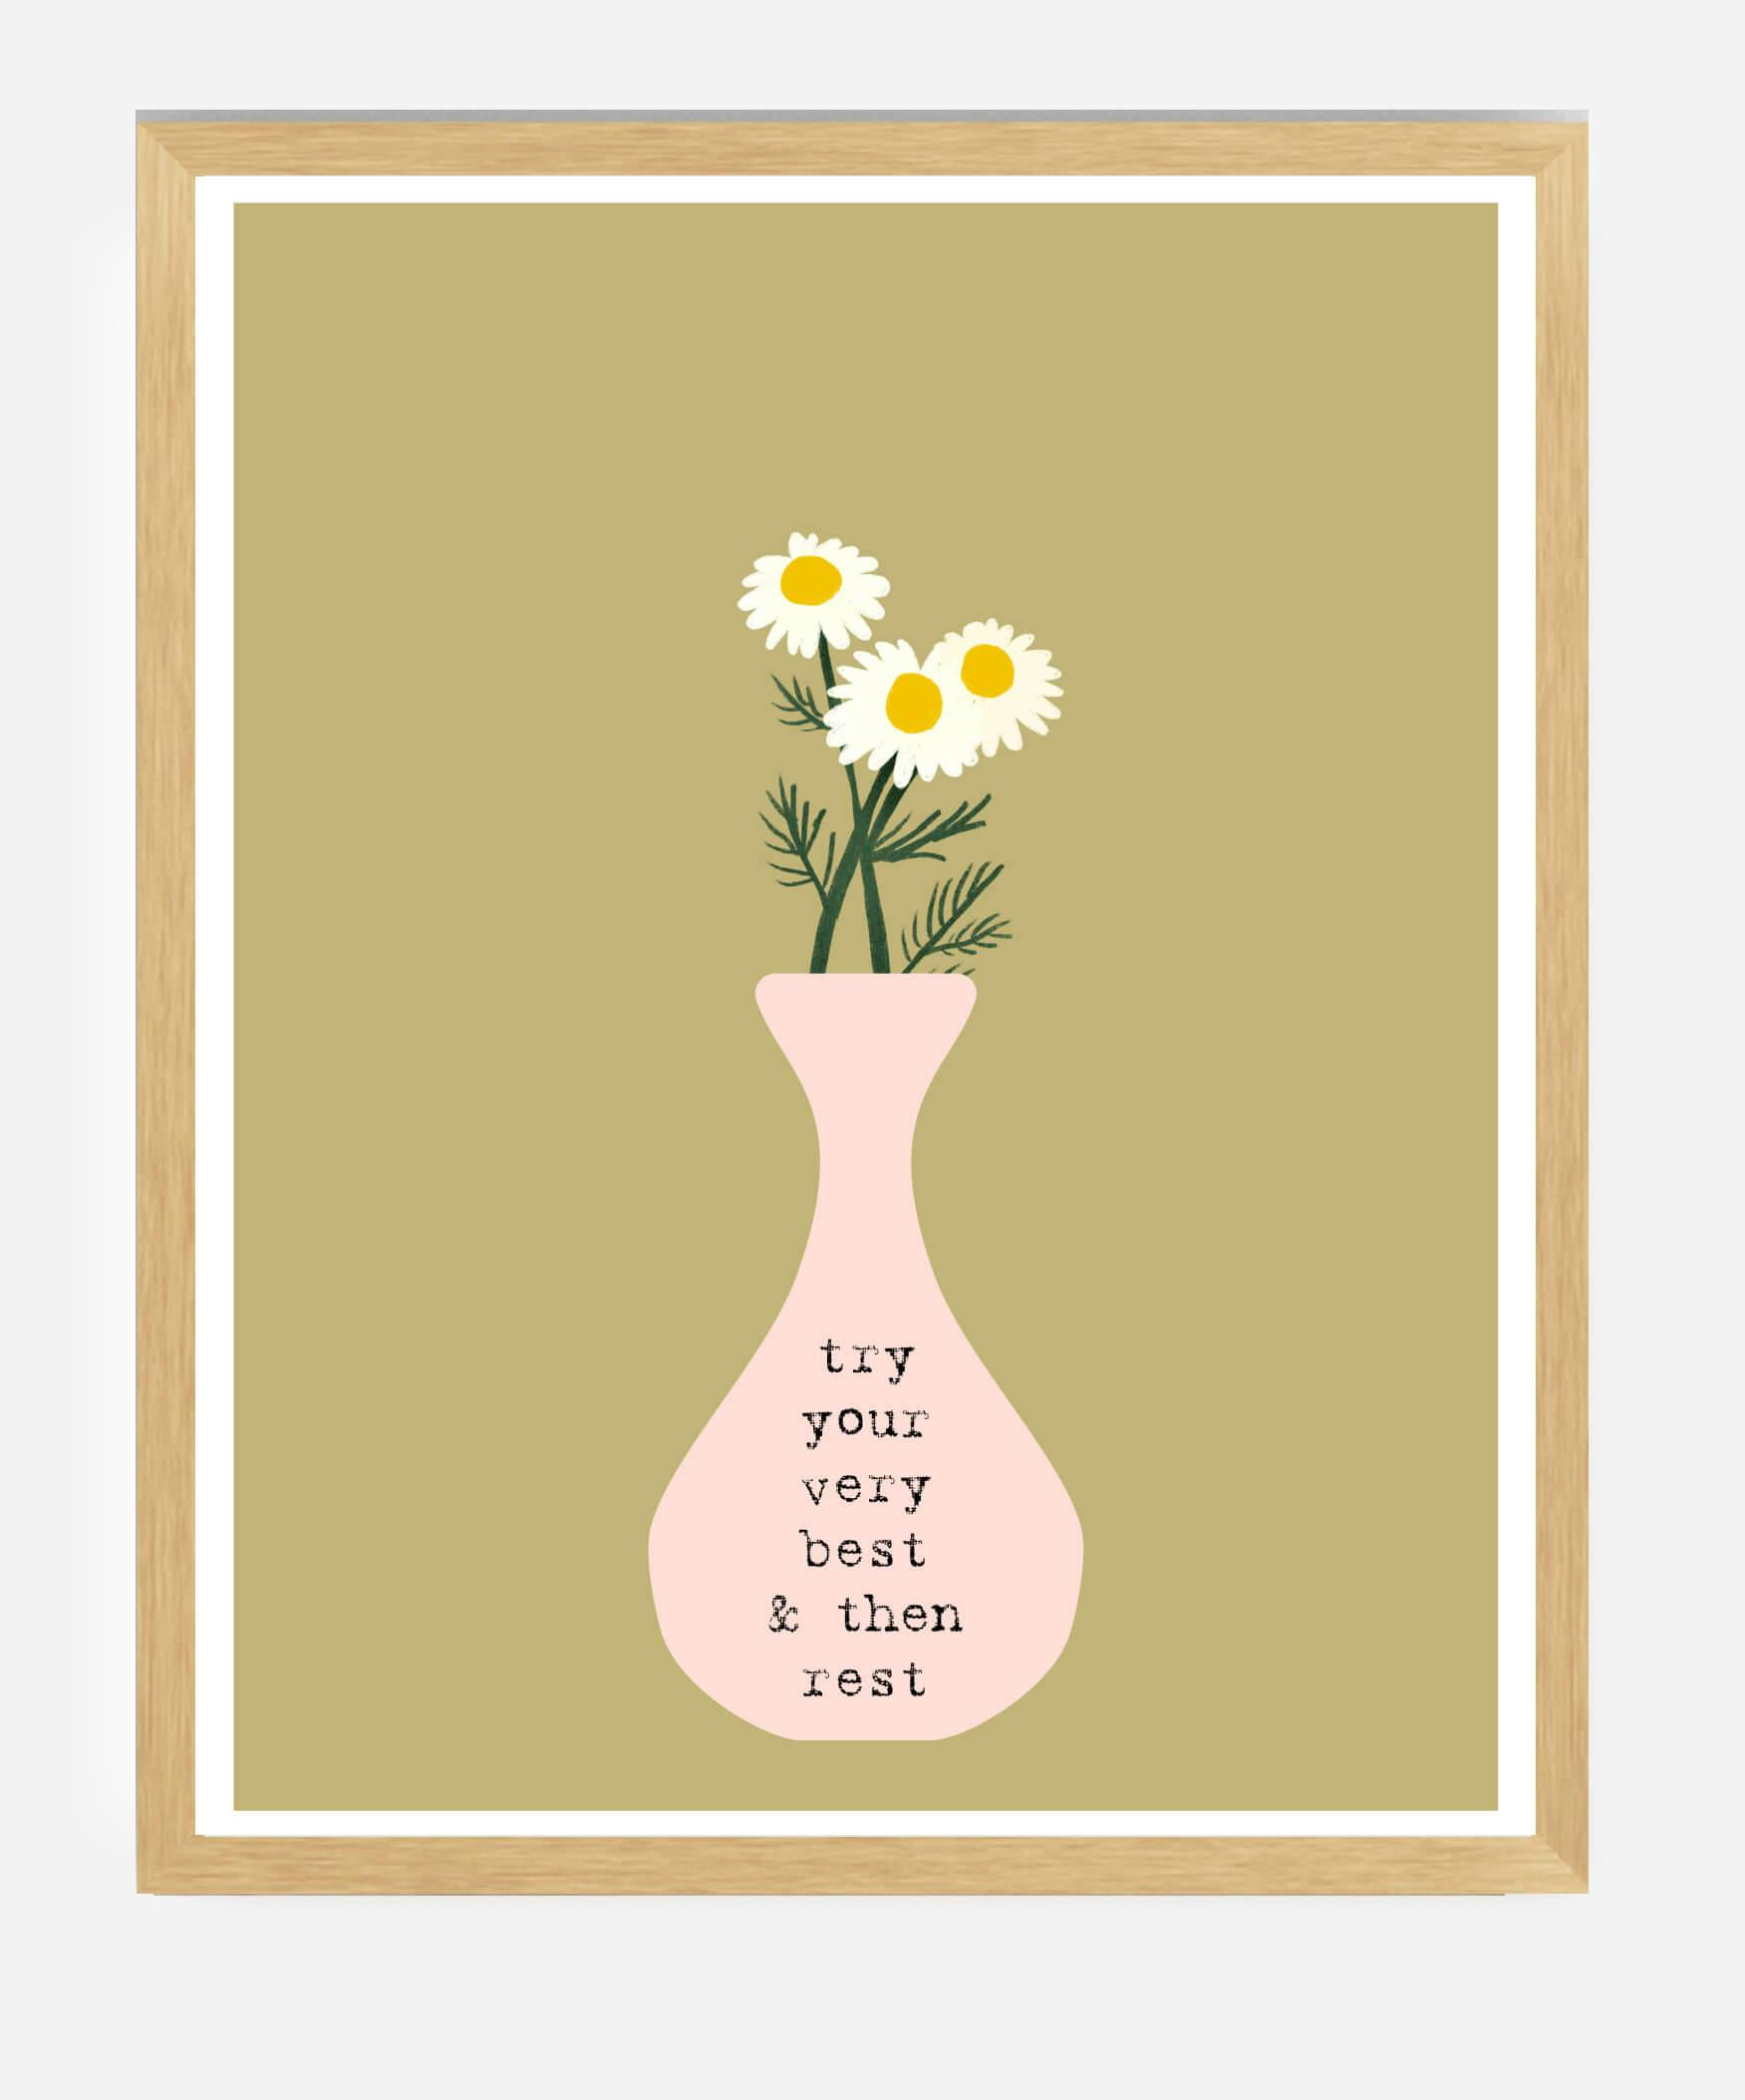 Daisies in Pale Pink Vase Uplifting Art Healing Art Daisy Art Try Your Best Print Positive Art Print - undefined - bright side girl shoppe